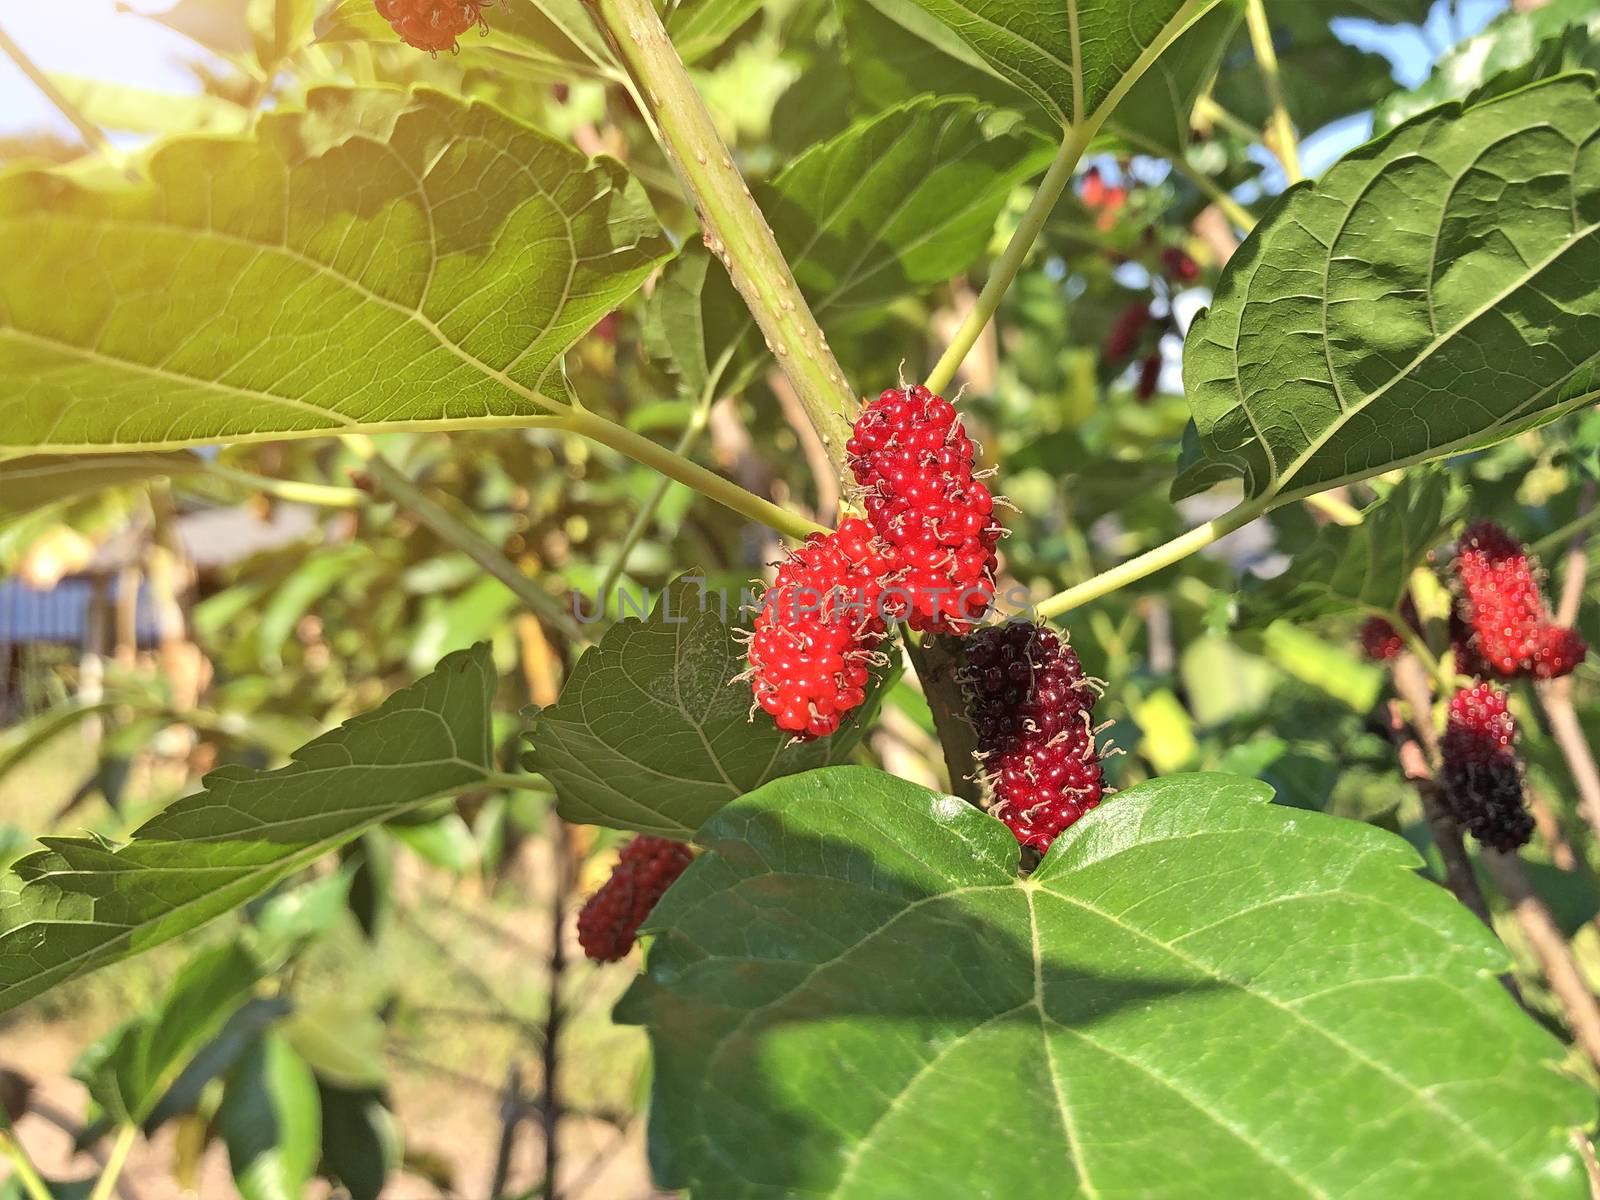 The mulberry fruits that are ripe and not ripe for health are pl by pkproject